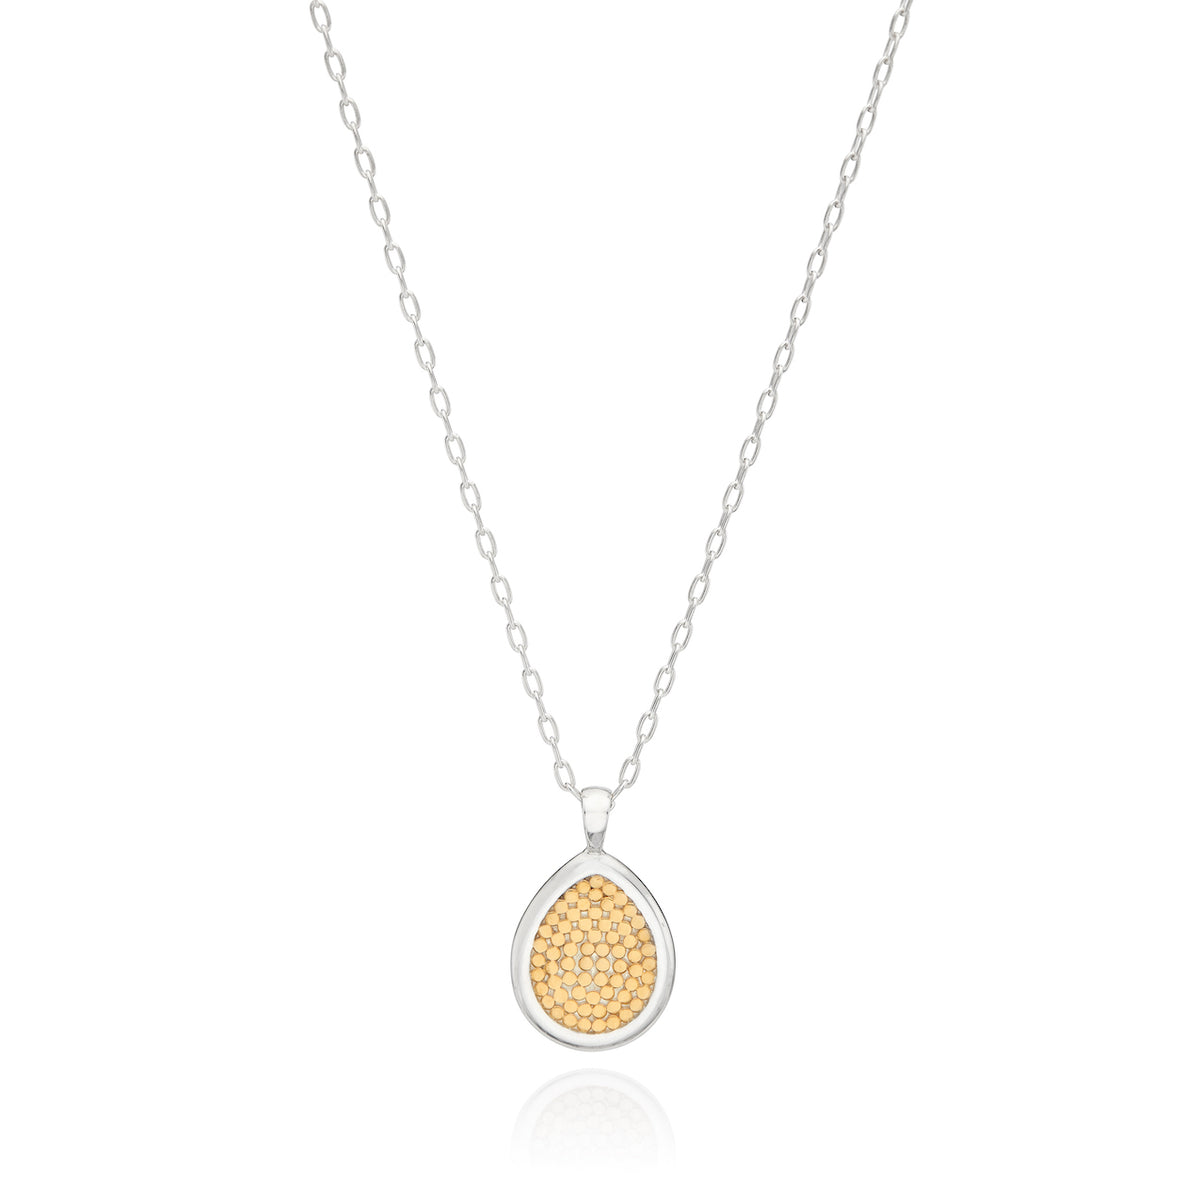 Reversible drop necklace in sterling silver with gold details